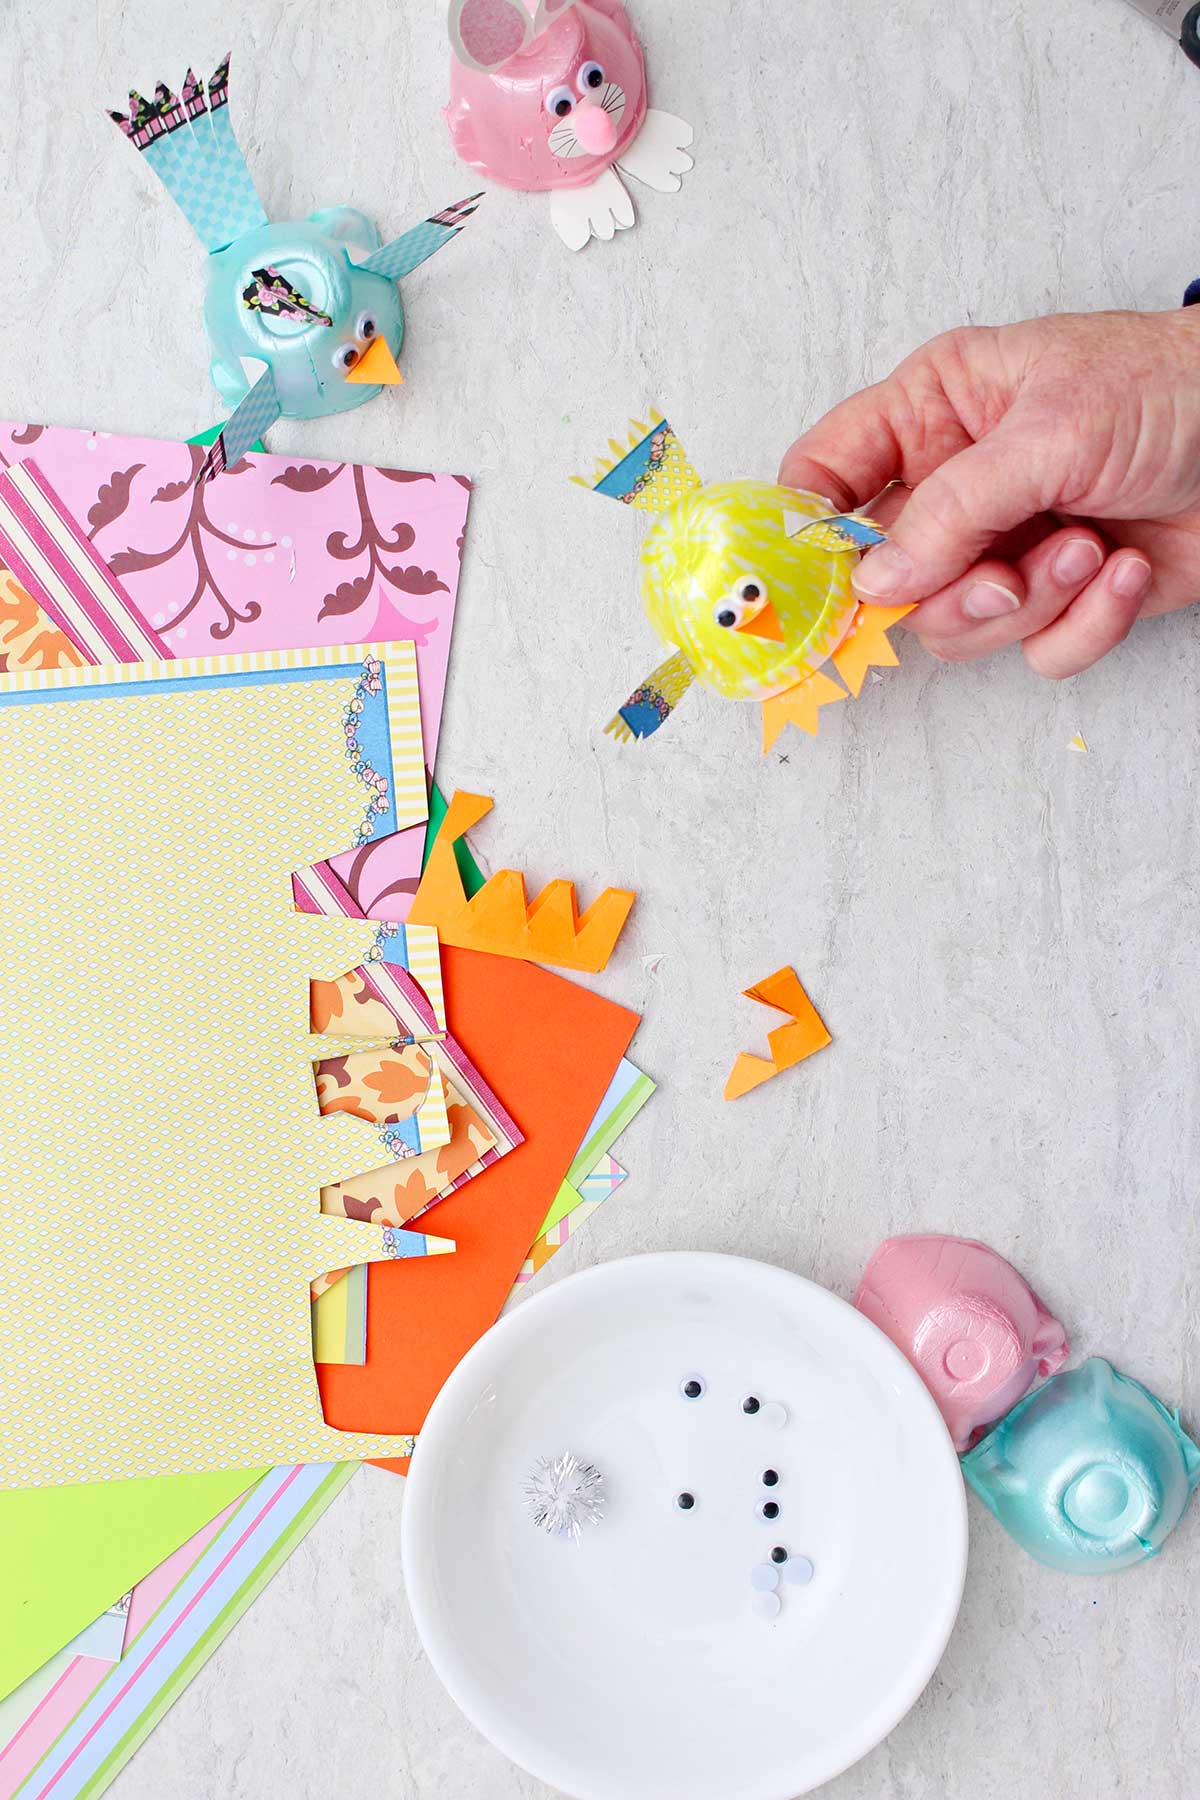 Hand holding yellow chick egg carton animal with other scraps of colorful paper and egg carton animals near by.